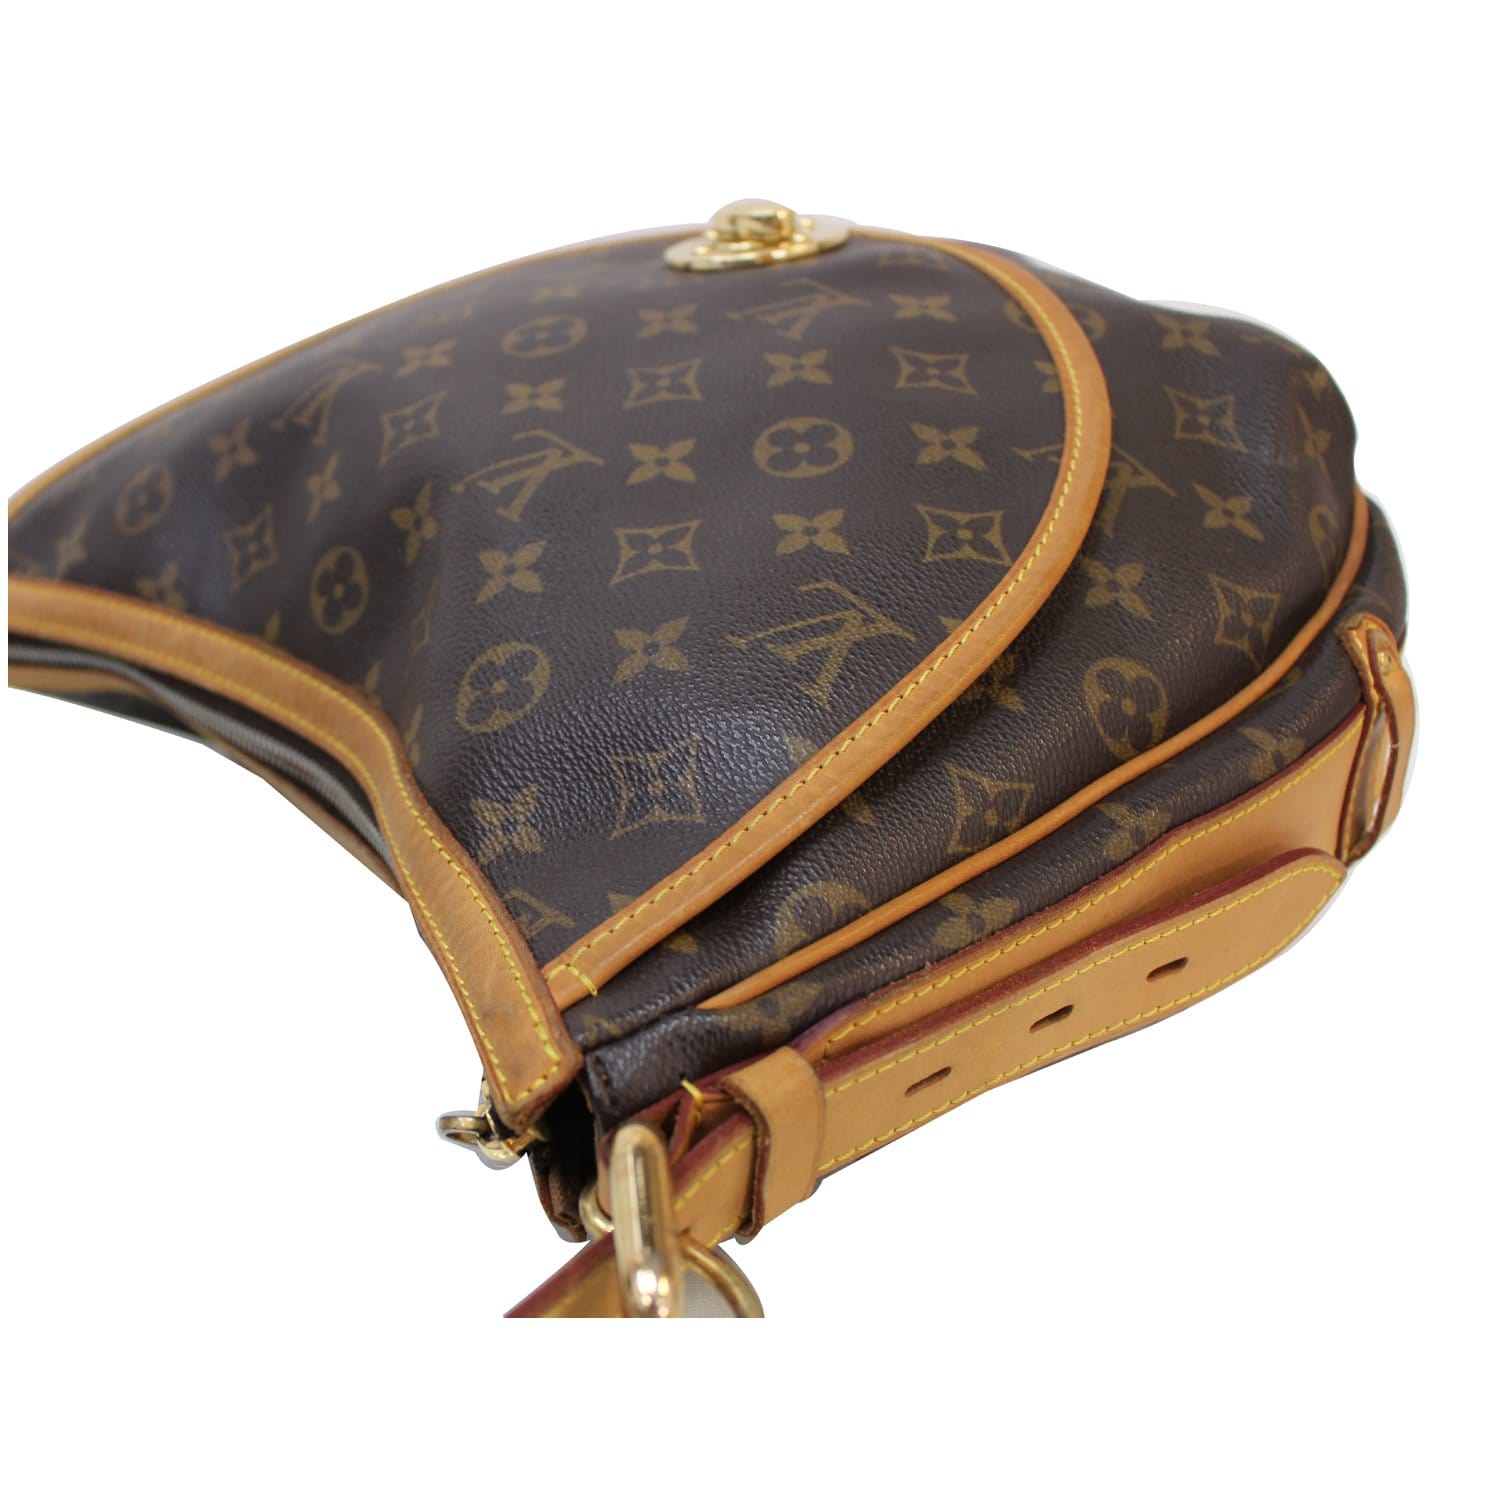 Louis Vuitton Ravello Gm Brown Canvas Shoulder Bag (Pre-Owned) – Bluefly